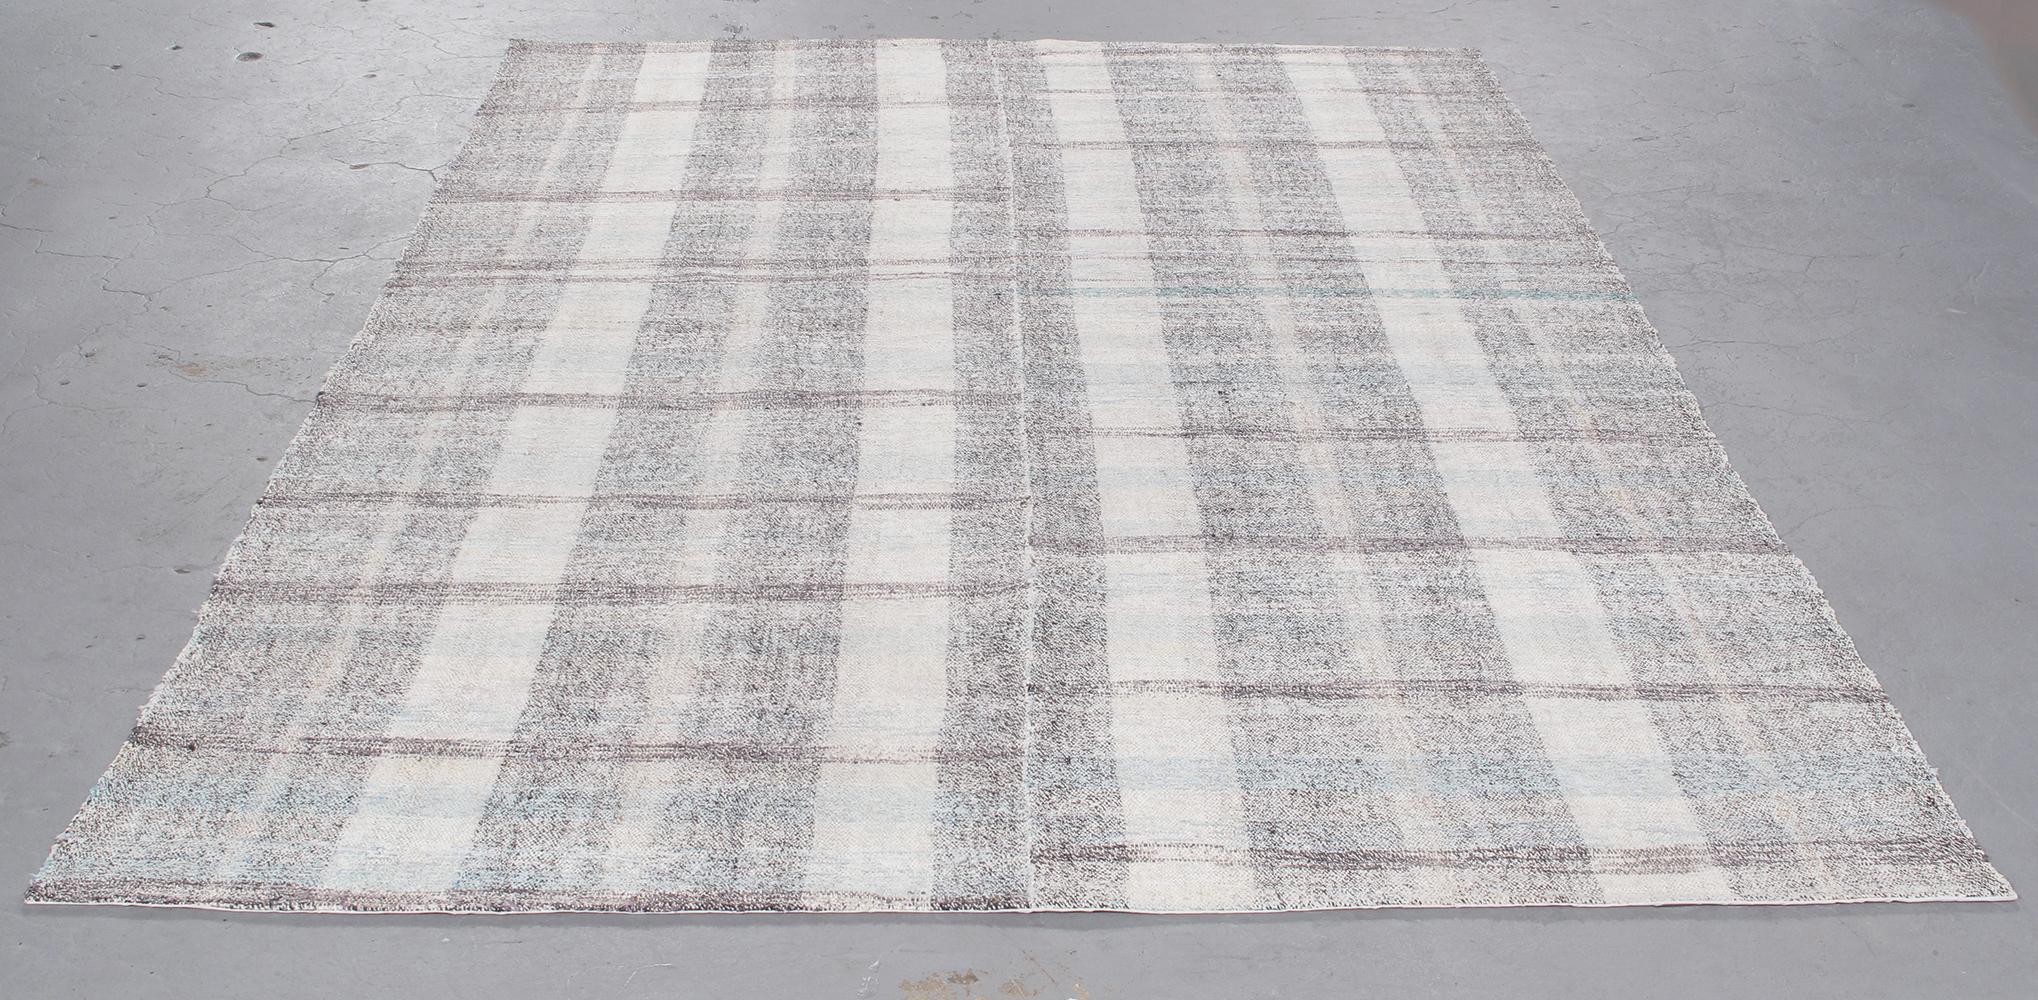 Made in Turkey, this Vintage Turkish Pelas flatweave rug is handmade with hand-spun wool and cotton and features a plaid design. Custom sizes and colors available. Rug size 6'0